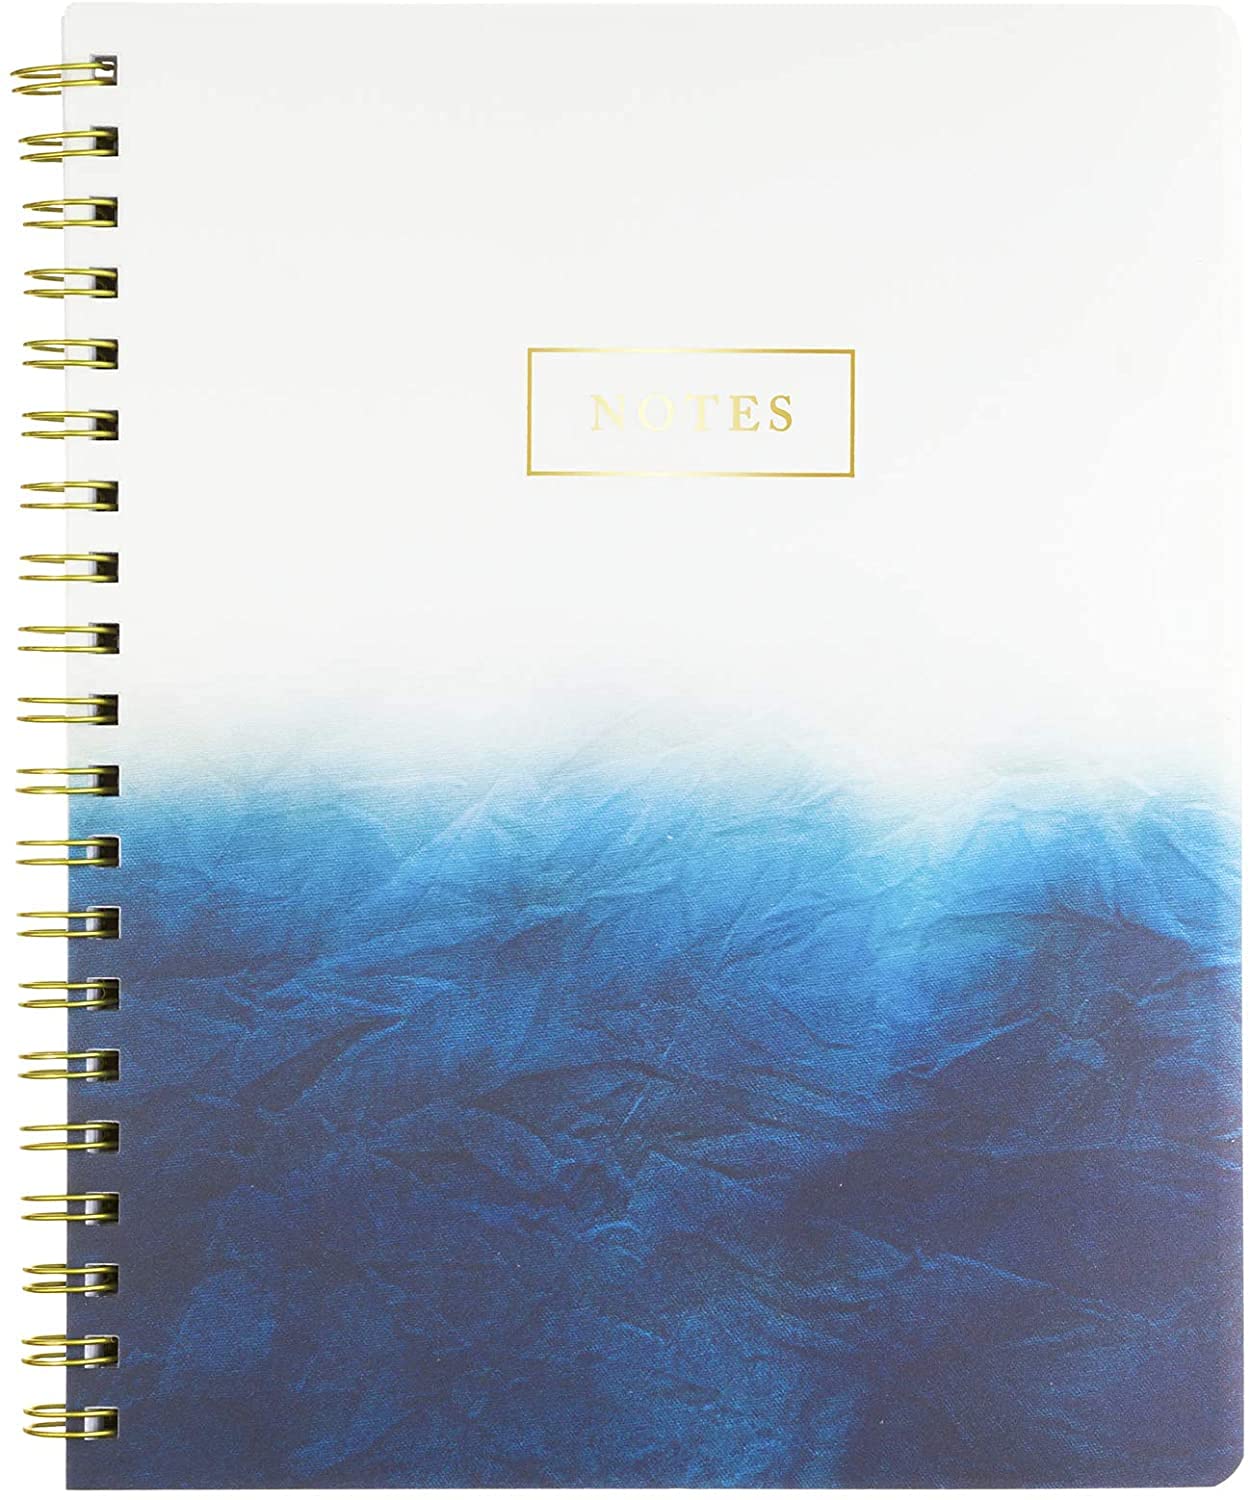 Eccolo Large Spiral Notebook Journal